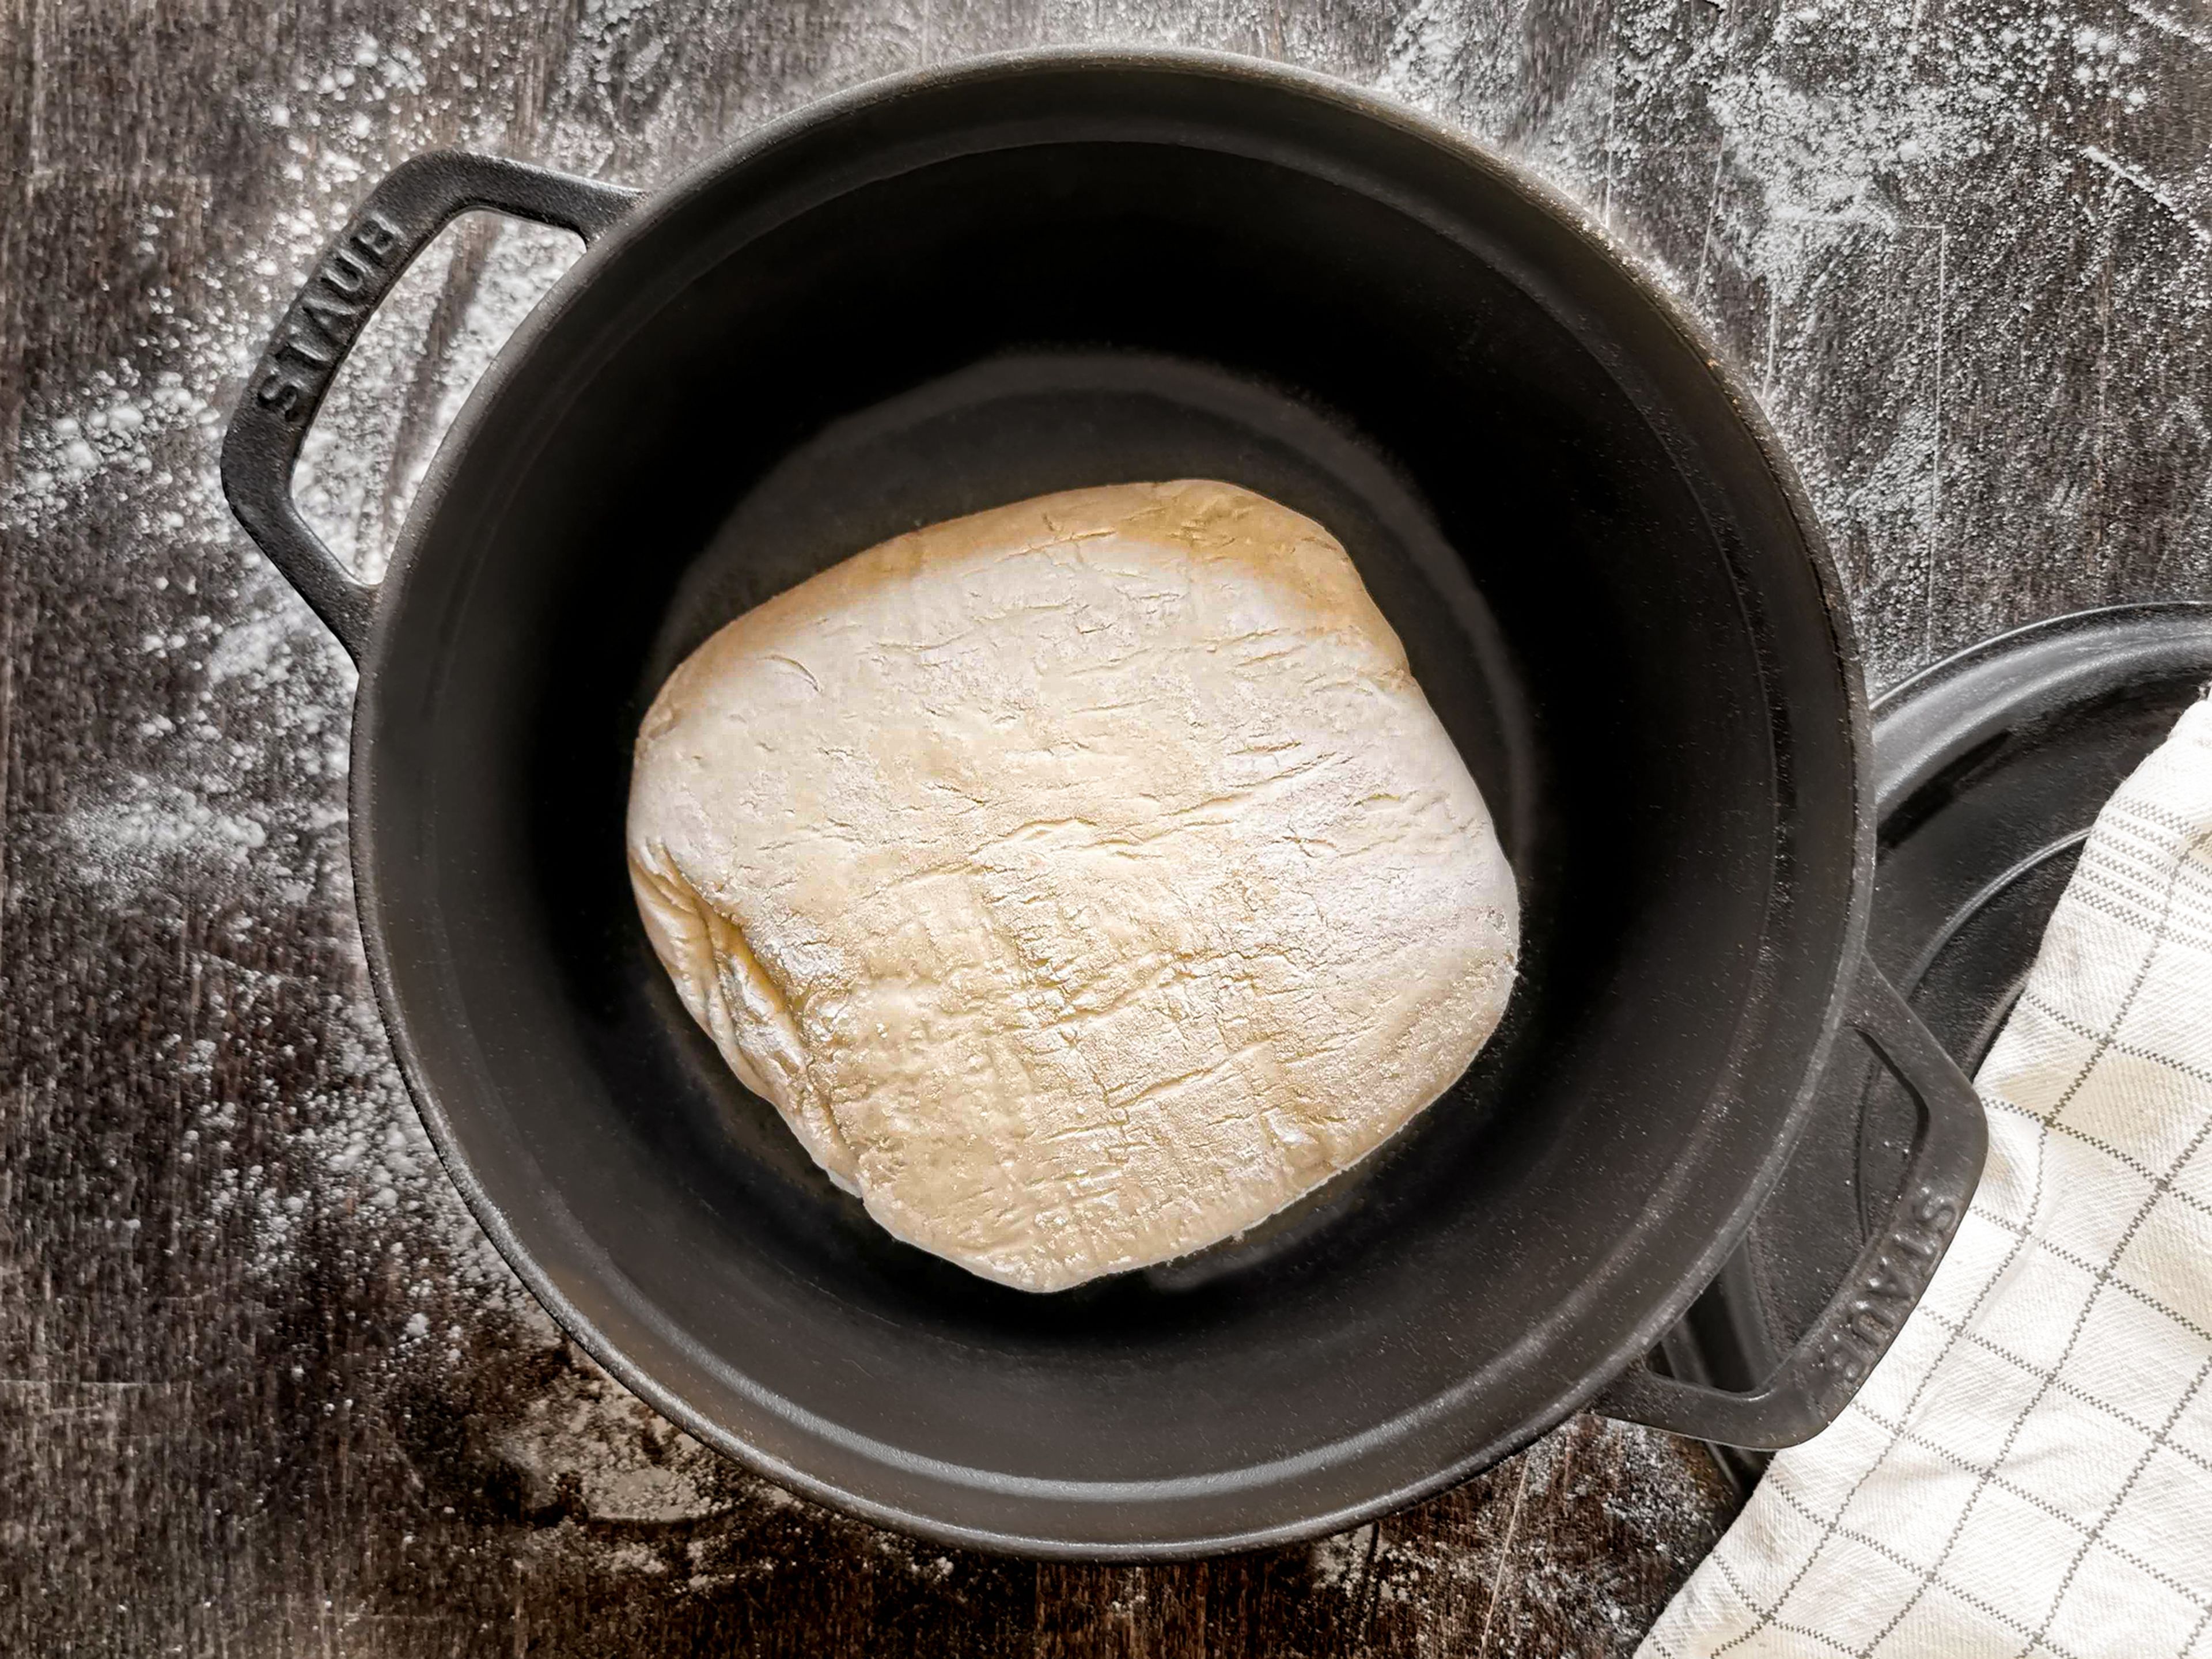 Preheat the oven to 250°C/480°F and heat the pot with a lid on an oven rack. Carefully remove the preheated pot and put the dough into the pan with the seam side down. Score it quickly if desired, then cover and bake the bread for approx. 30 min. Remove the lid and bake for another 15 to 30 min. if you want a darker crust.